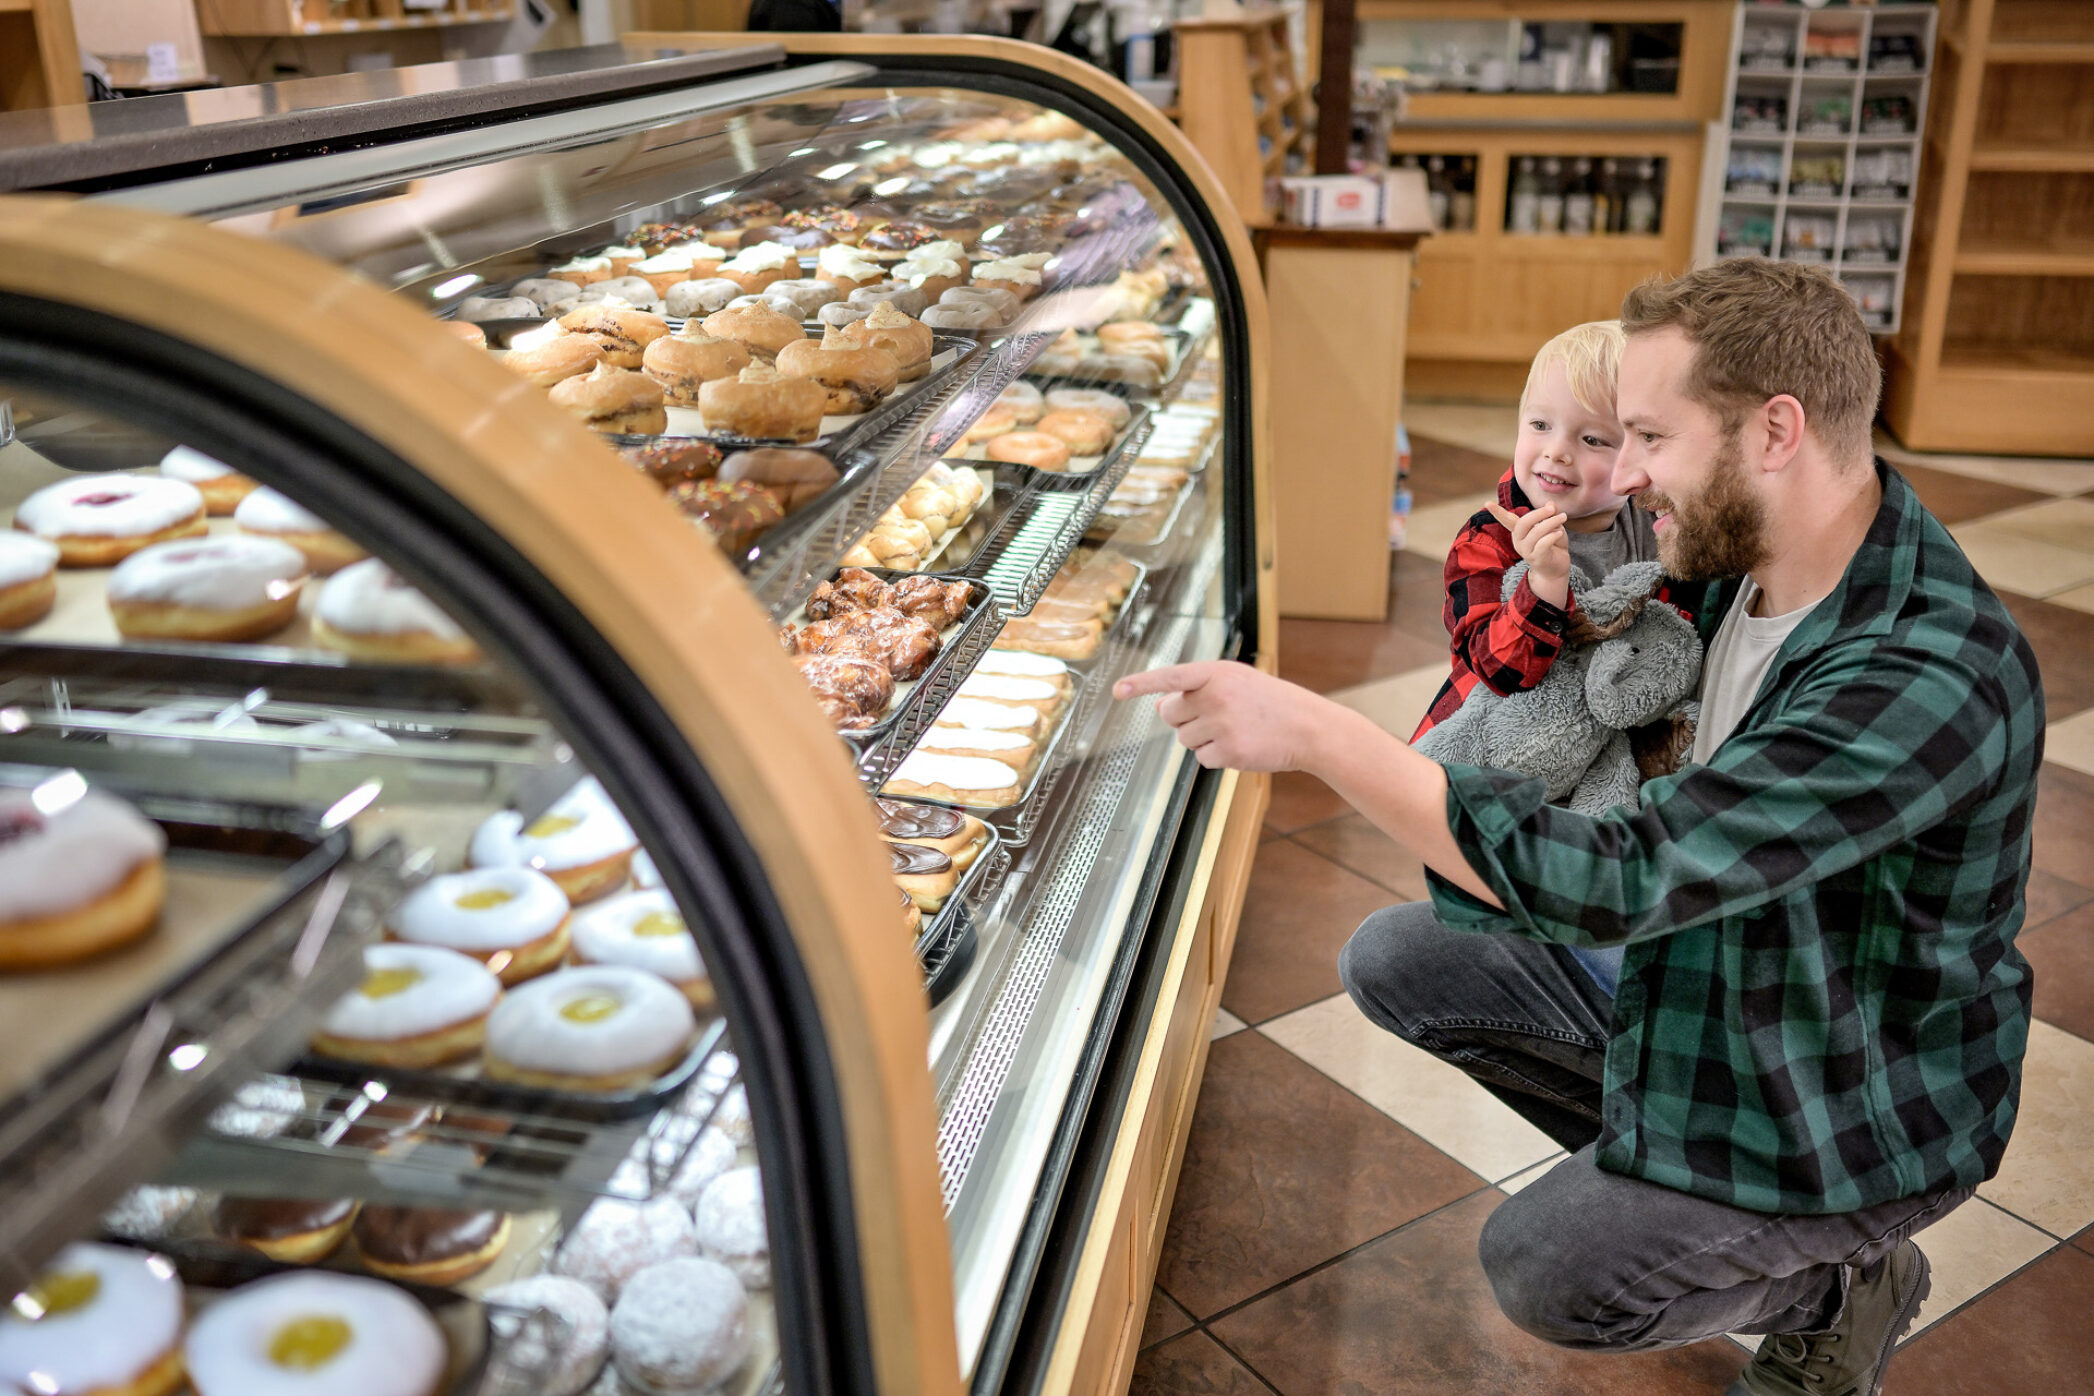 Father with child pointing at Dutch Valley bakery items behind glass